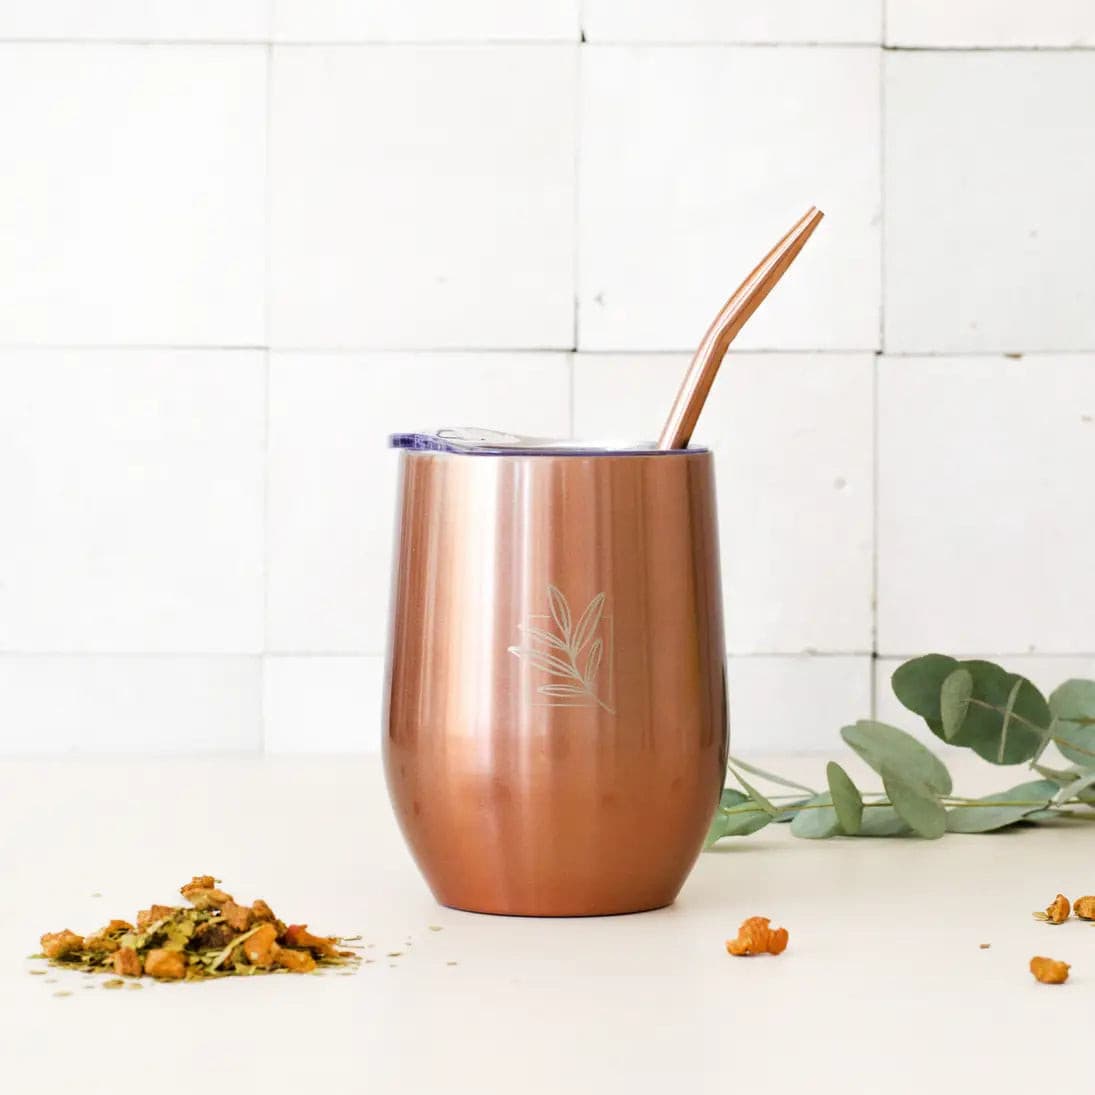 Copper Pink insulated cup and its bombilla for Mate, Tea & Coffee.